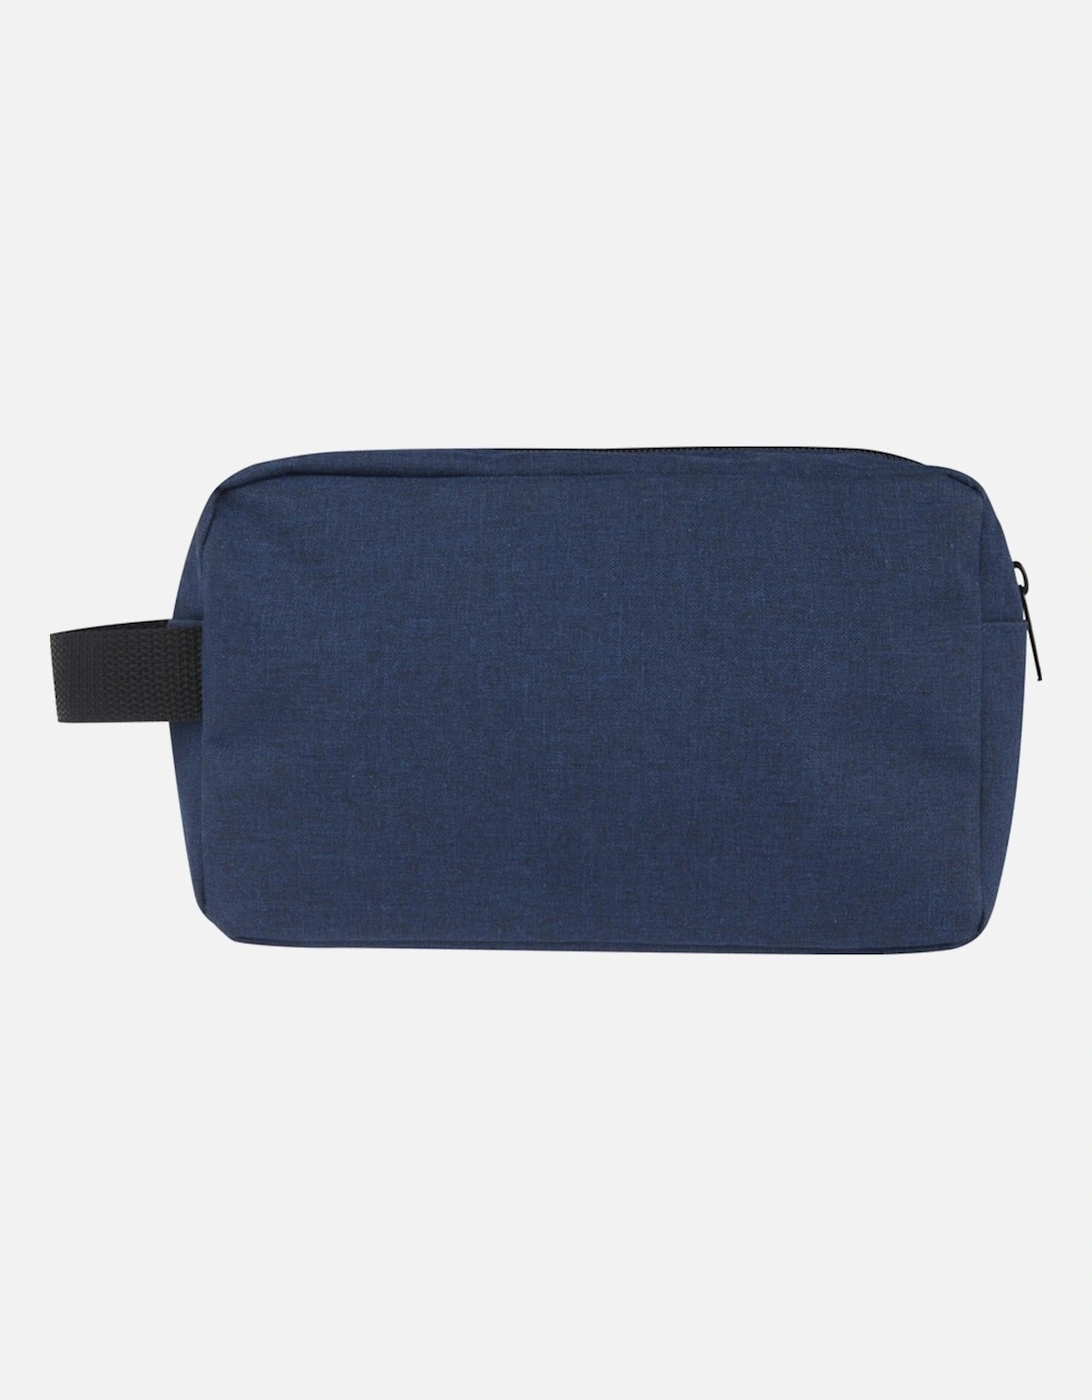 Ross Recycled Polyester 1.5L Toiletry Bag